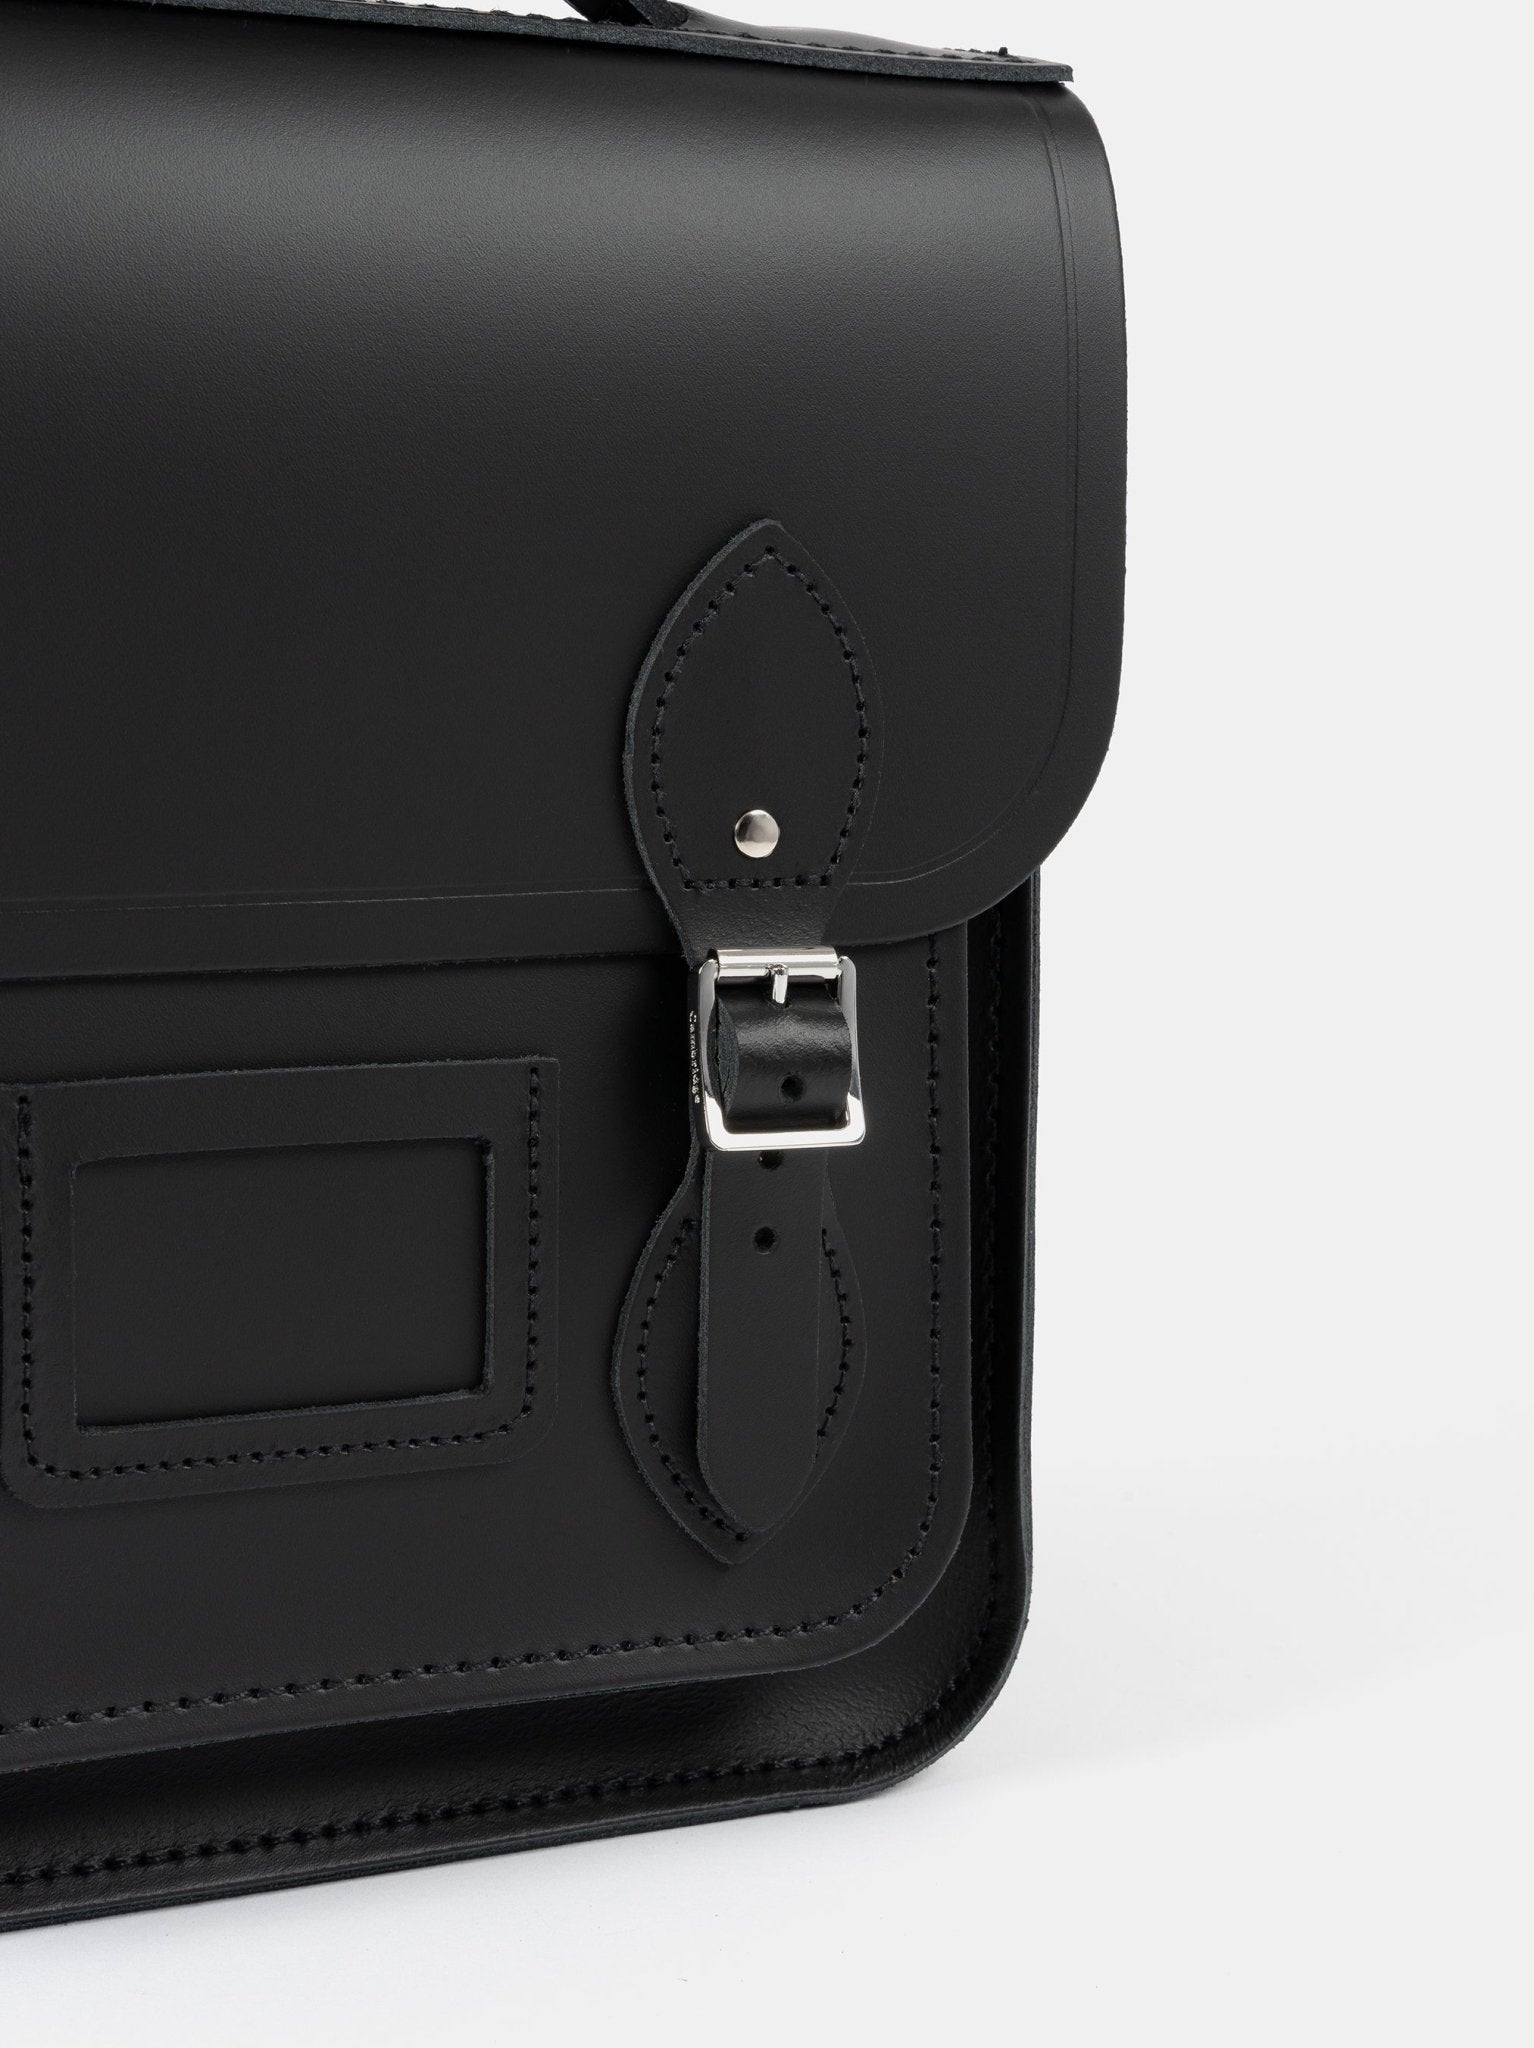 The Small Portrait Backpack - Black - The Cambridge Satchel Company US Store